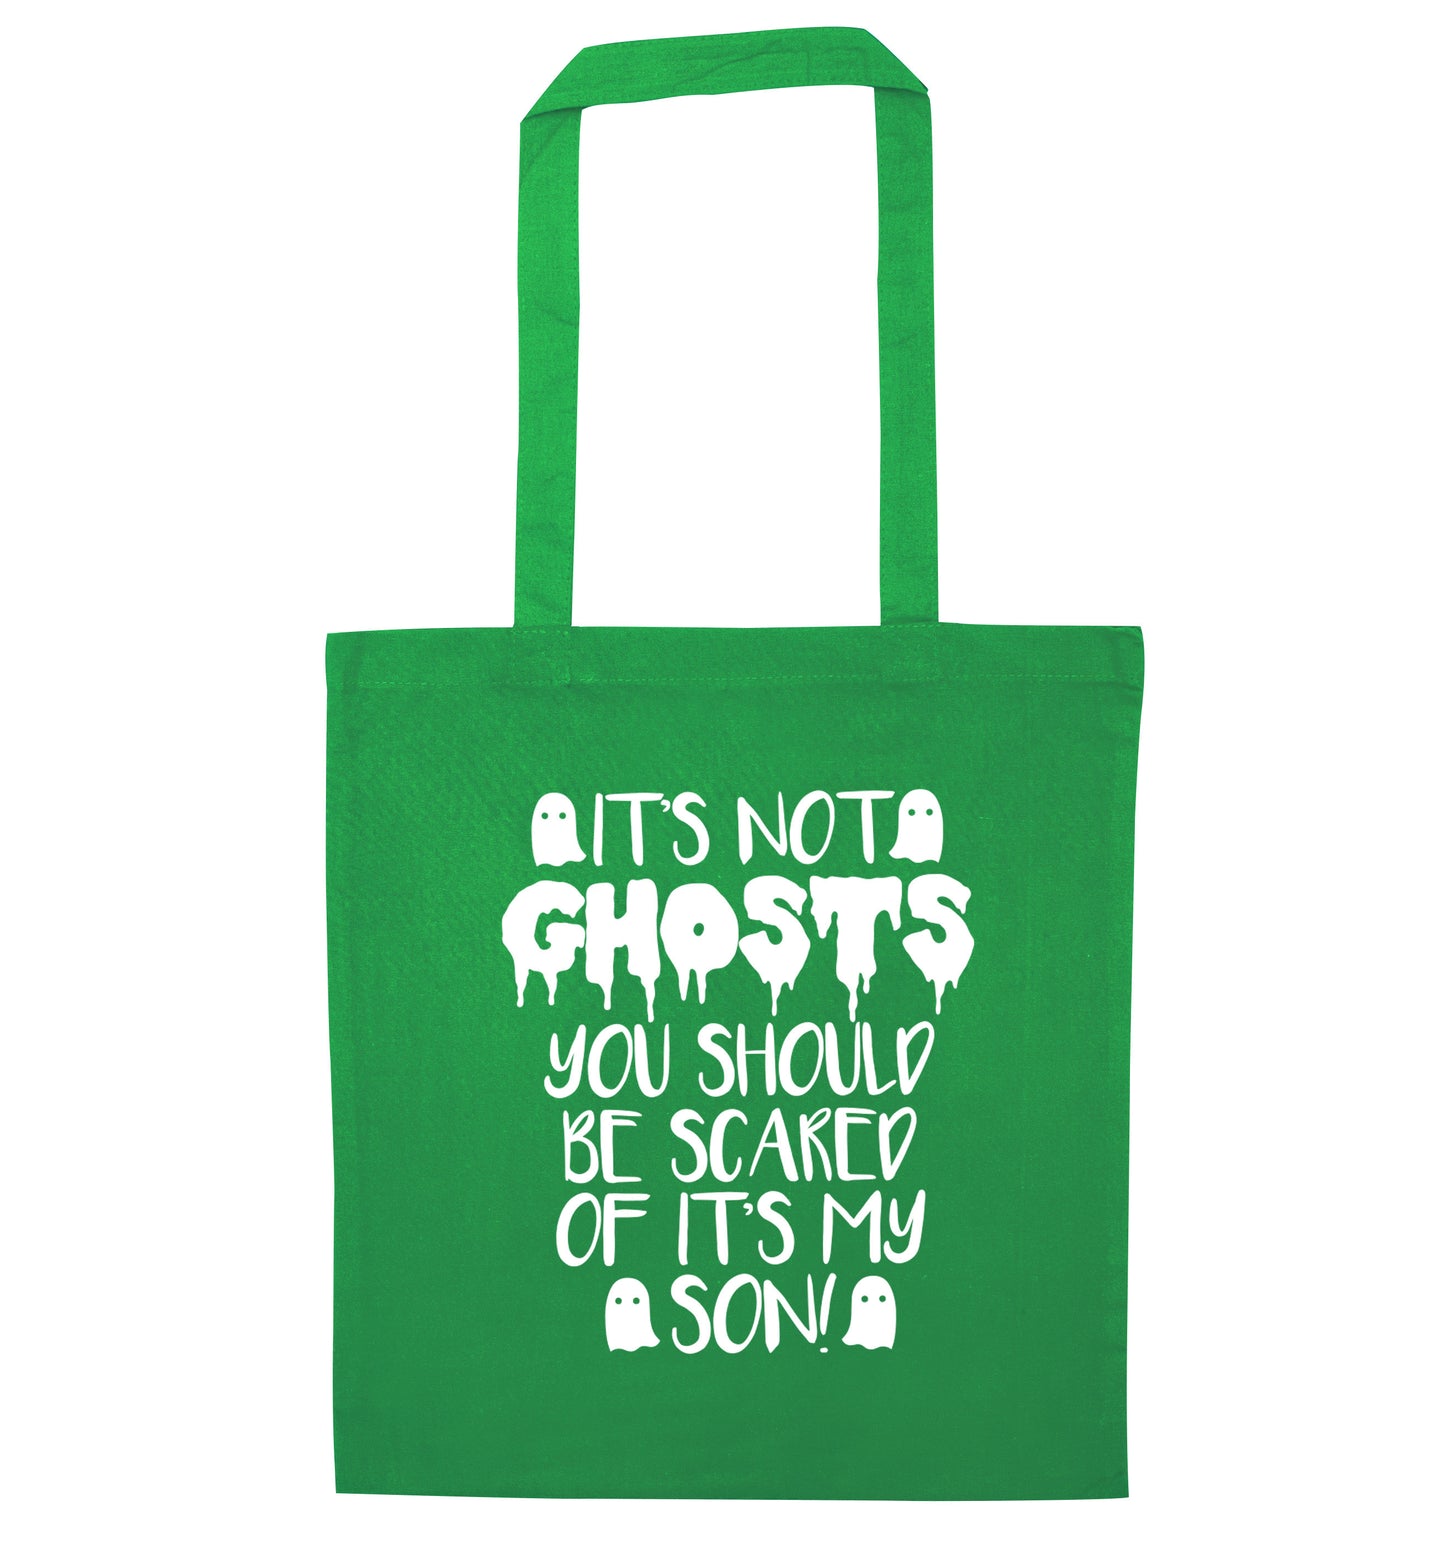 It's not ghosts you should be scared of it's my son! green tote bag